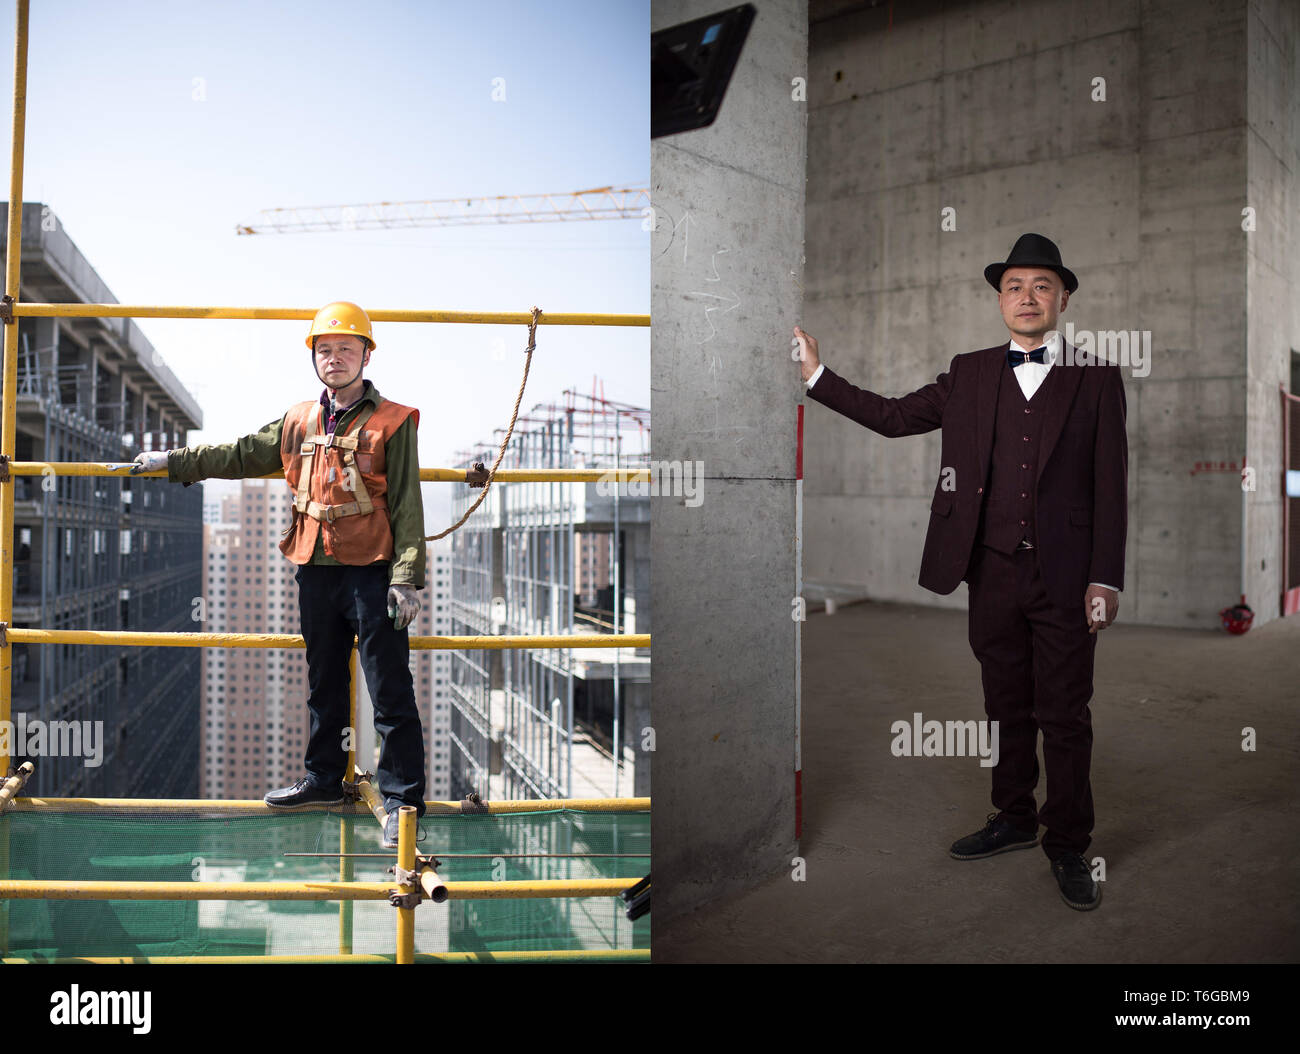 (190501) -- XINING, May 1, 2019 (Xinhua) -- This diptych photo taken on April 27, 2019 shows Tang Huijun, a scaffold worker with China Construction Third Engineering Bureau Co., Ltd., posing in his daily work outfit (L) and in a formal dress (R) in Xining, northwest China's Qinghai Province. In this series of portrait diptychs, frontline workers with China Construction Third Engineering Bureau Co., Ltd. appear in contrastingly different dress styles, but nevertheless manage to show the elegance of their professions. (Xinhua/Wu Gang) Stock Photo